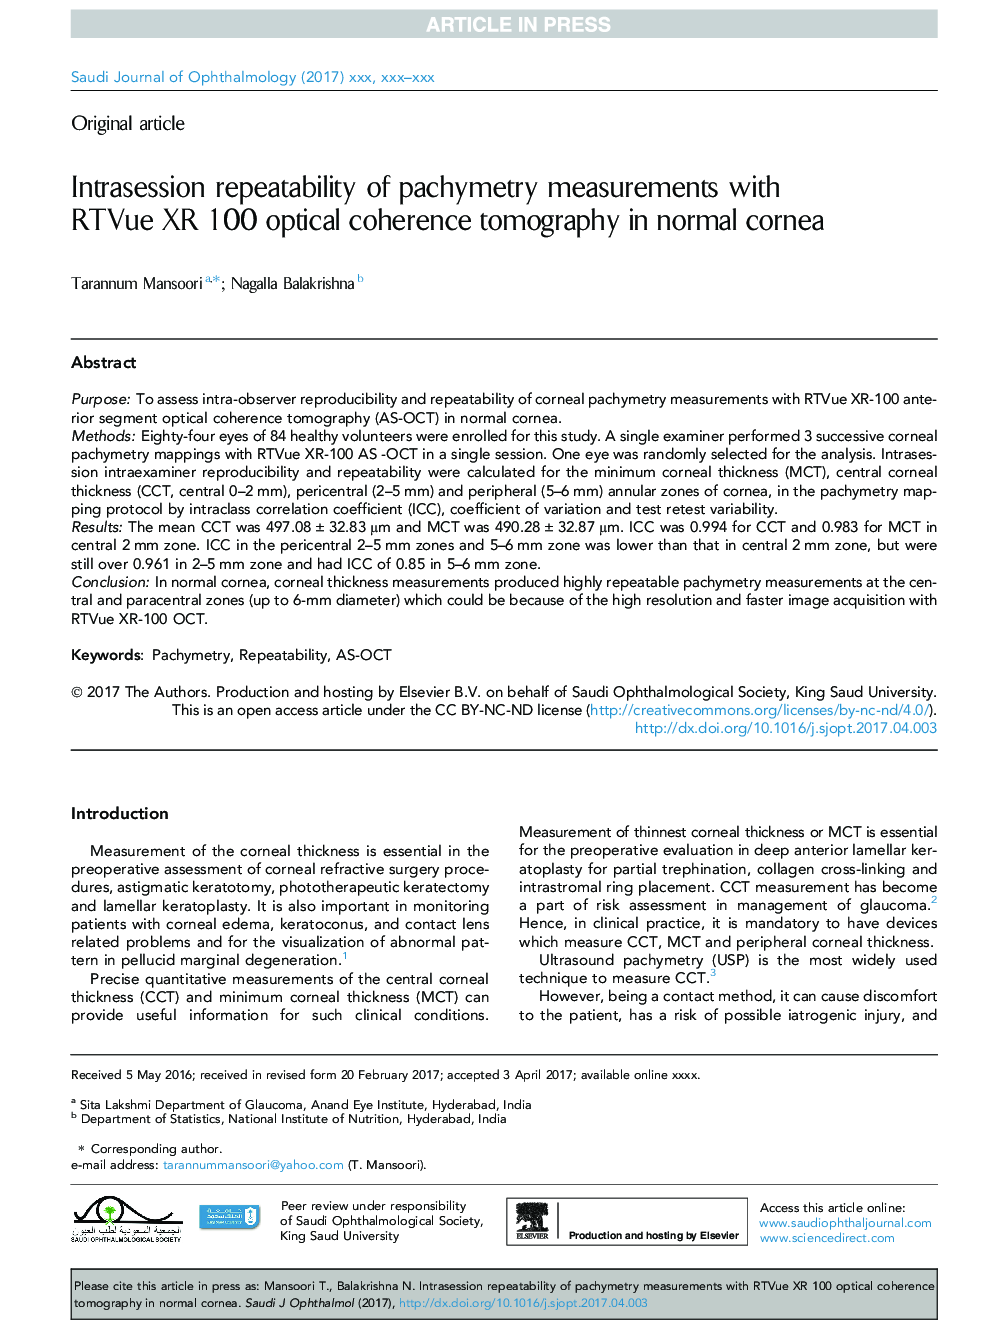 Intrasession repeatability of pachymetry measurements with RTVue XR 100 optical coherence tomography in normal cornea